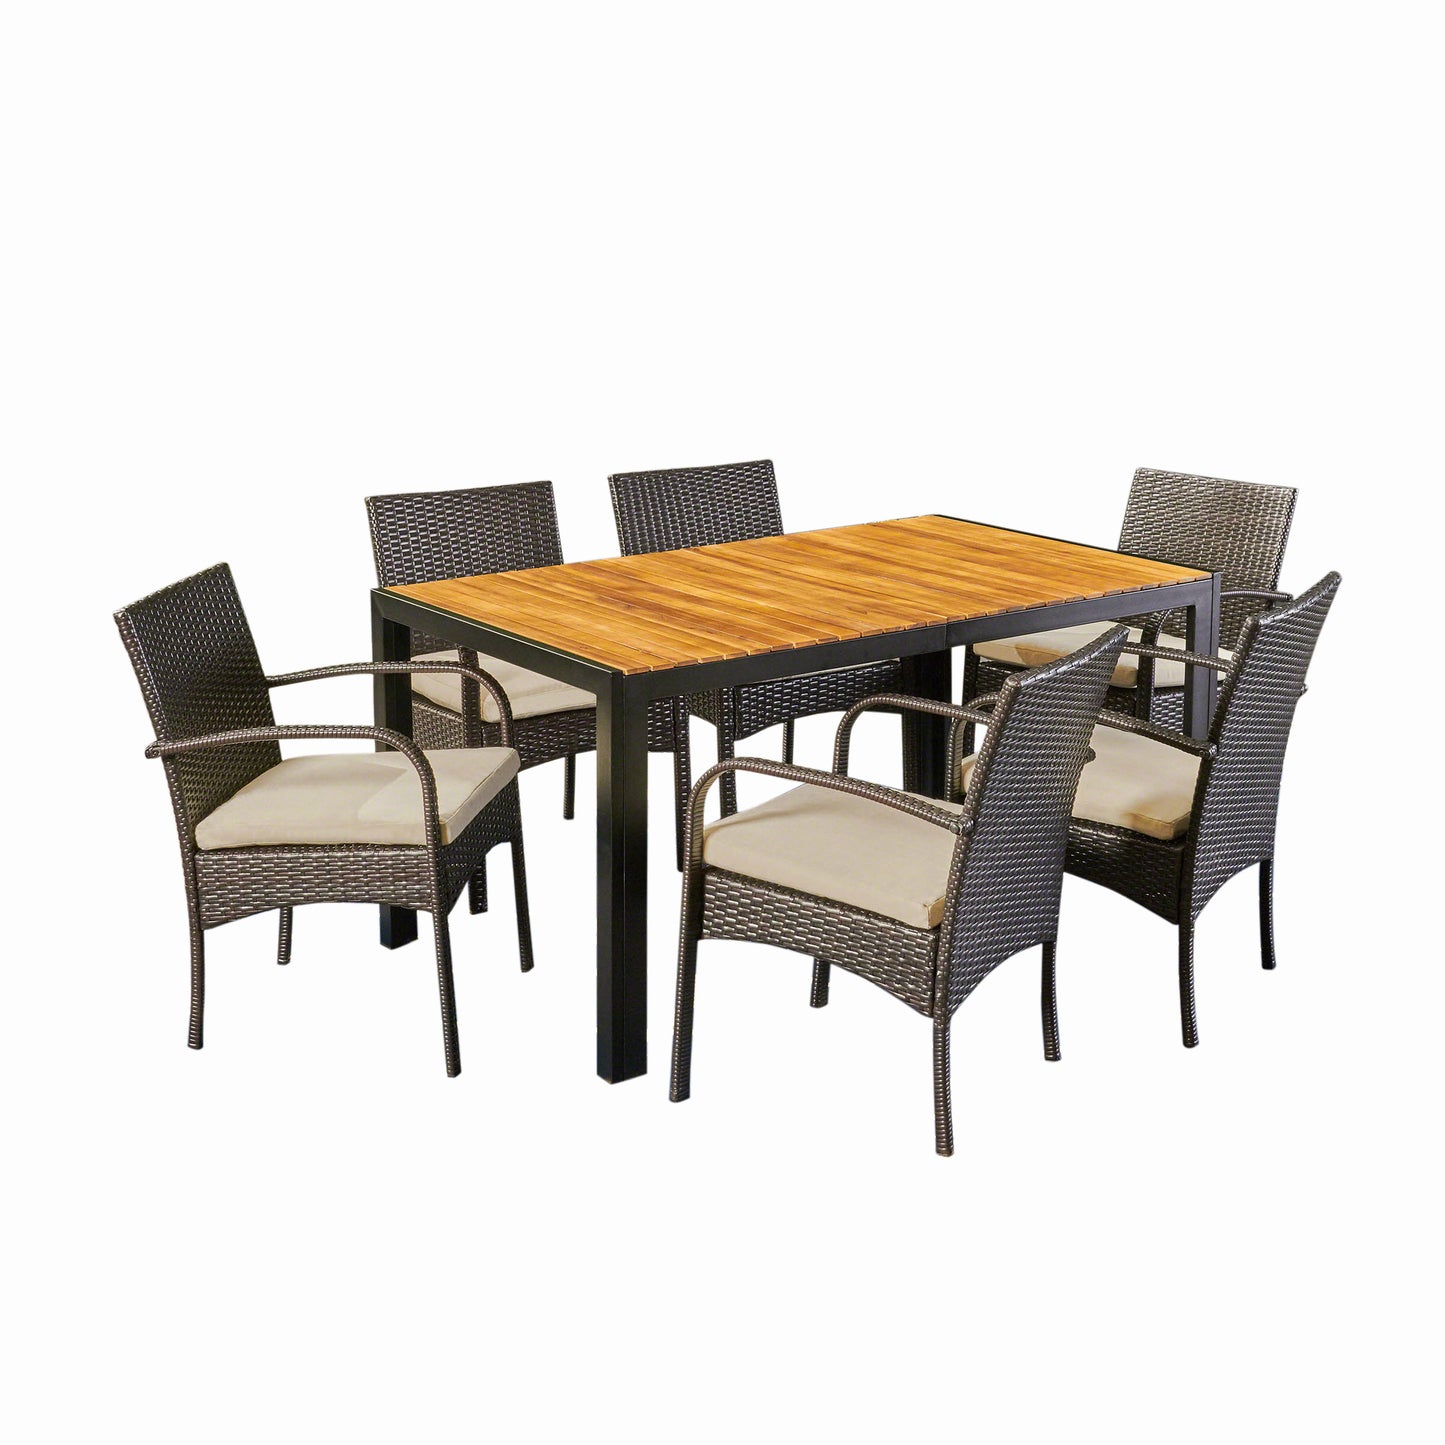 Quintina Outdoor 6-Seater Rectangular Acacia Wood and Wicker Dining Set, Teak with Black and Brown with Cream